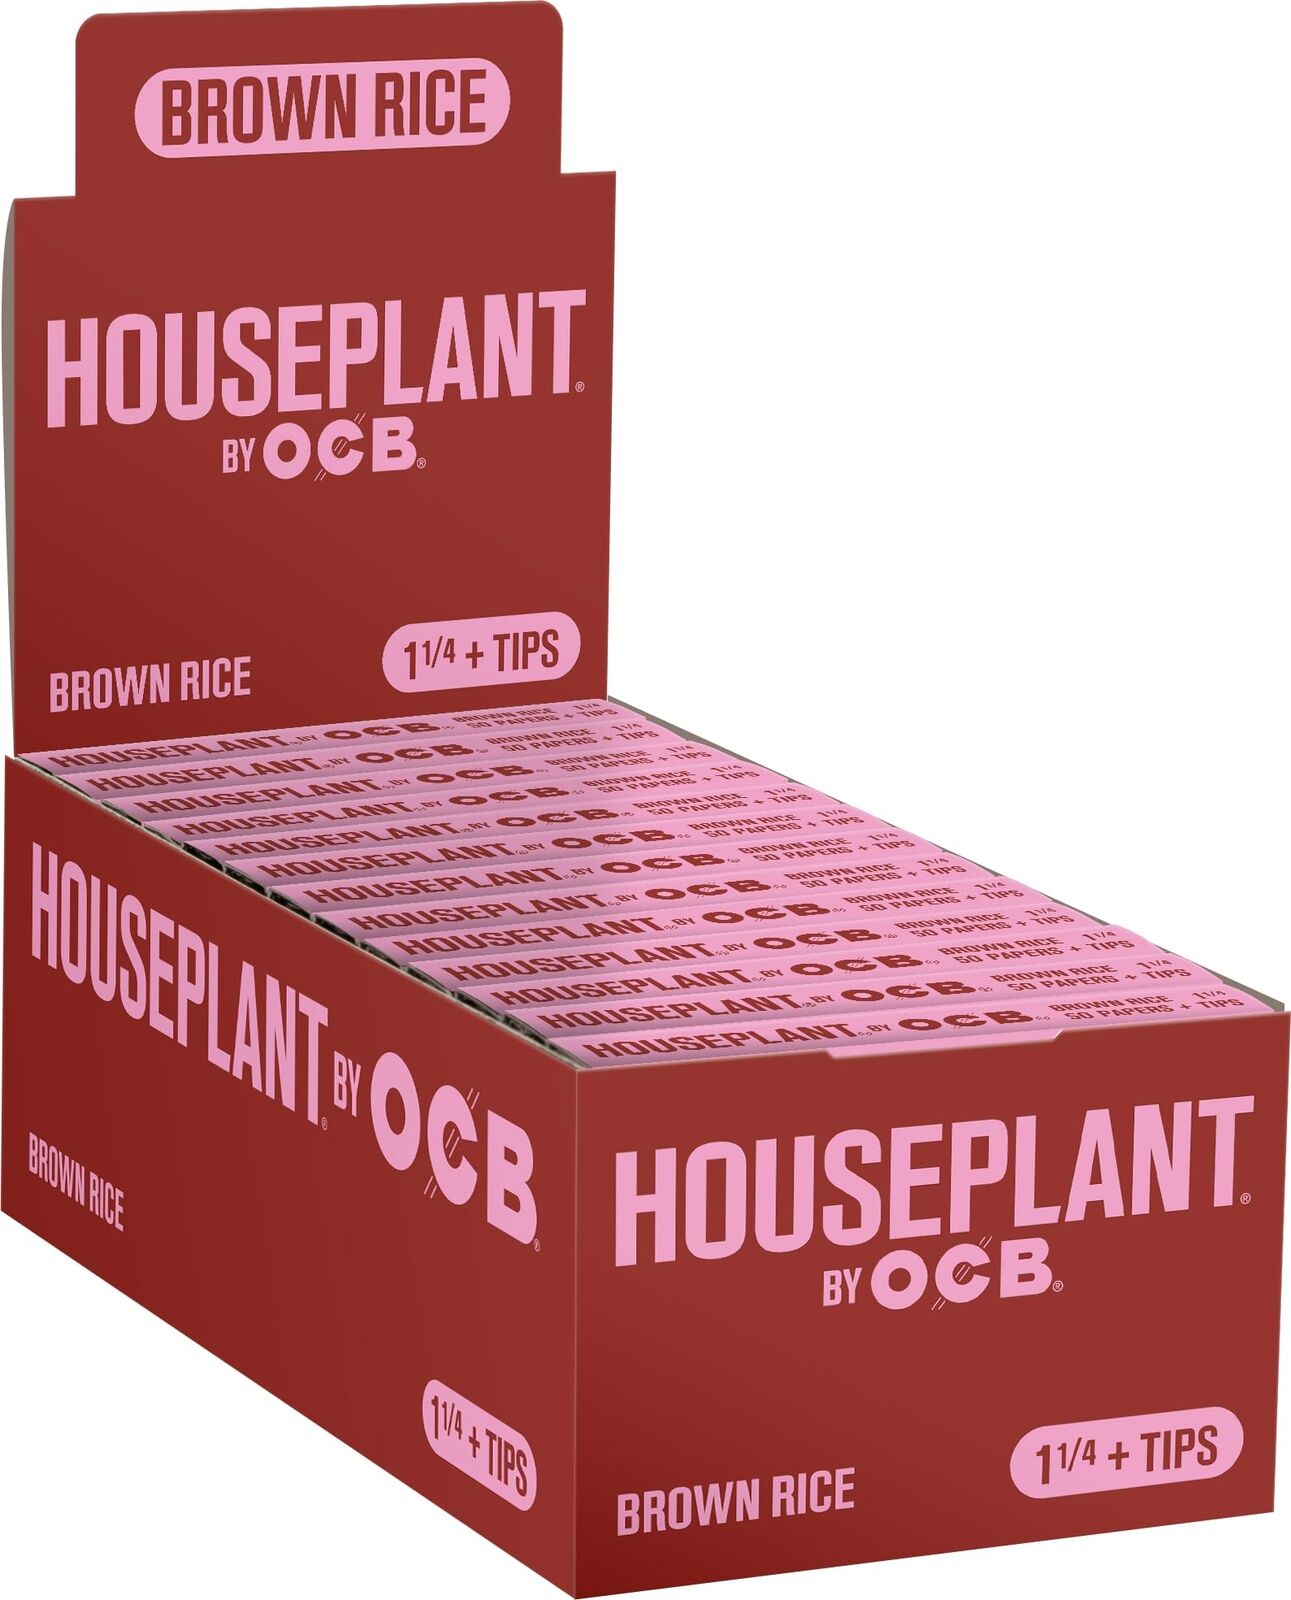 Houseplant® by OCB® Brown Rice 1 1/4 Rolling Papers + Tips